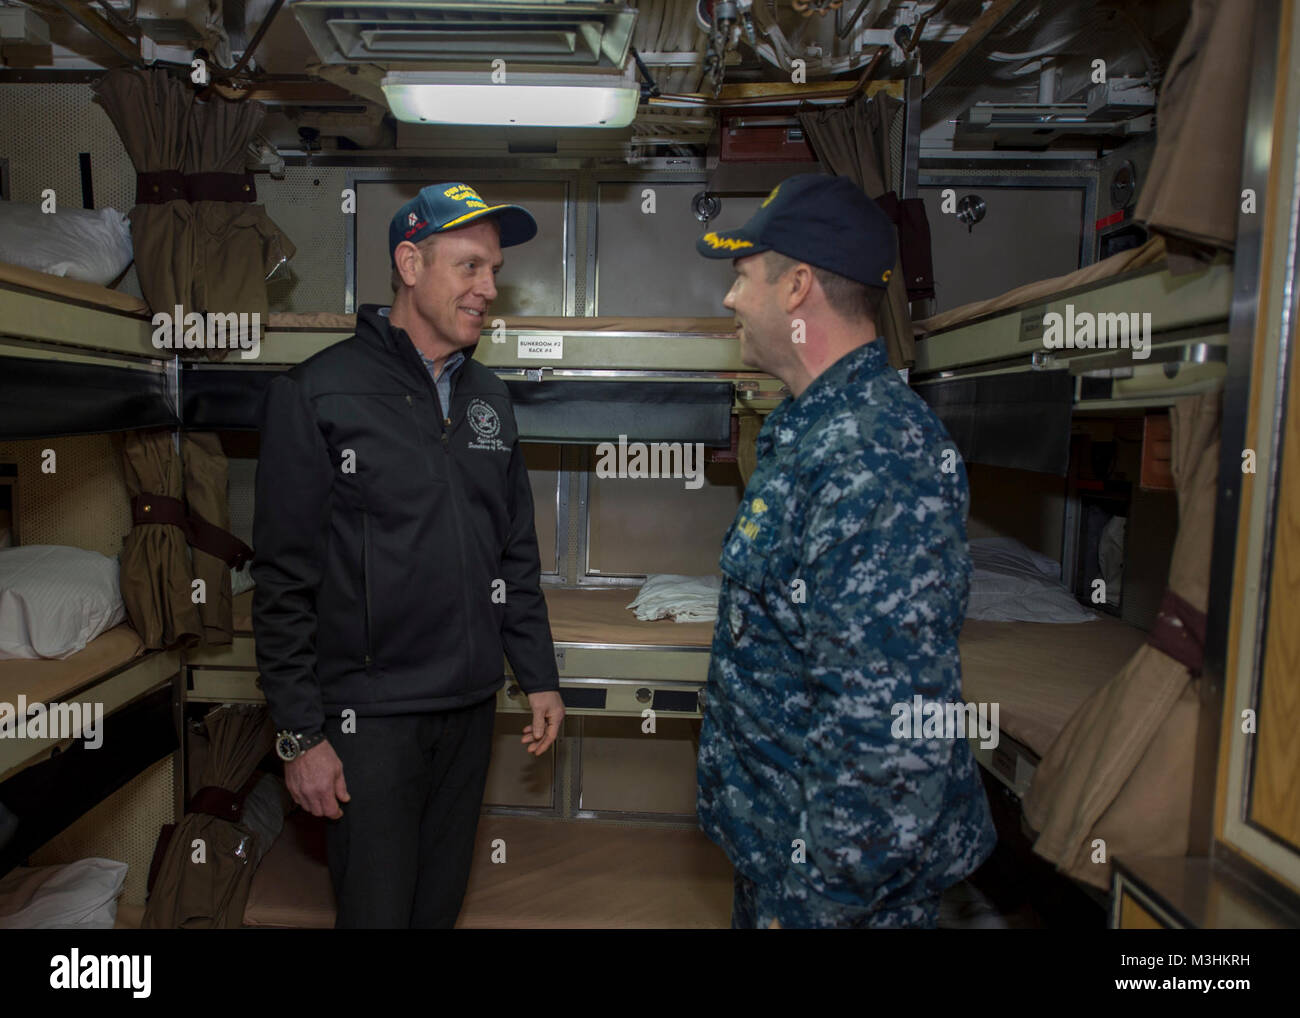 BANGOR, Wash. (Feb. 9, 2018) Cmdr. Jeffery Yackeren commanding officer to Ohio-class ballistic missile submarine USS Alabama (SSBN 731), shows  Deputy Secretary of Defense Patrick Shanahan sailors living quarters. Alabama is one of eight ballistic-missile submarines stationed at the base, providing the most survivable leg of the strategic deterrence triad for the United States.   (U.S. Navy Stock Photo